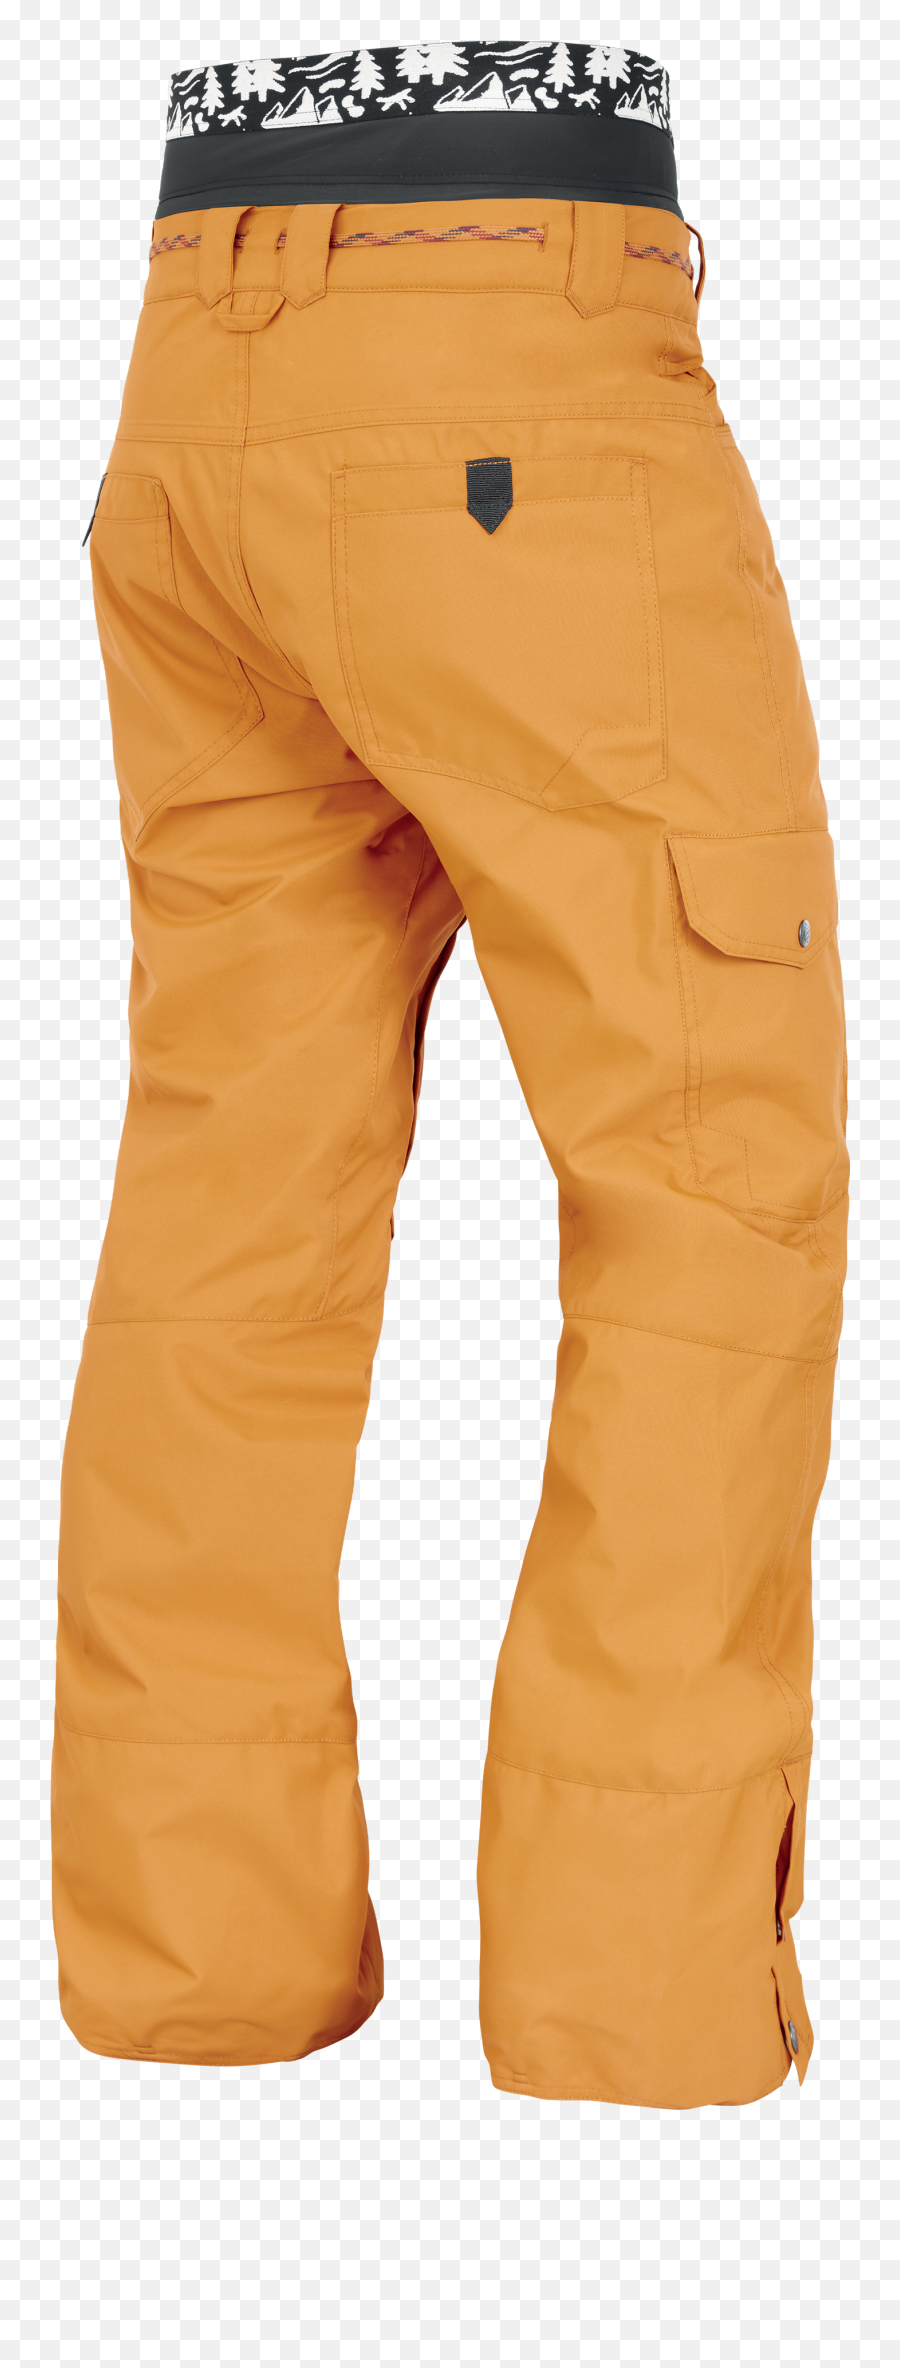 Snow Pants Under Pt Picture - Under Pant Png,Oakley Icon Backpack Yellow